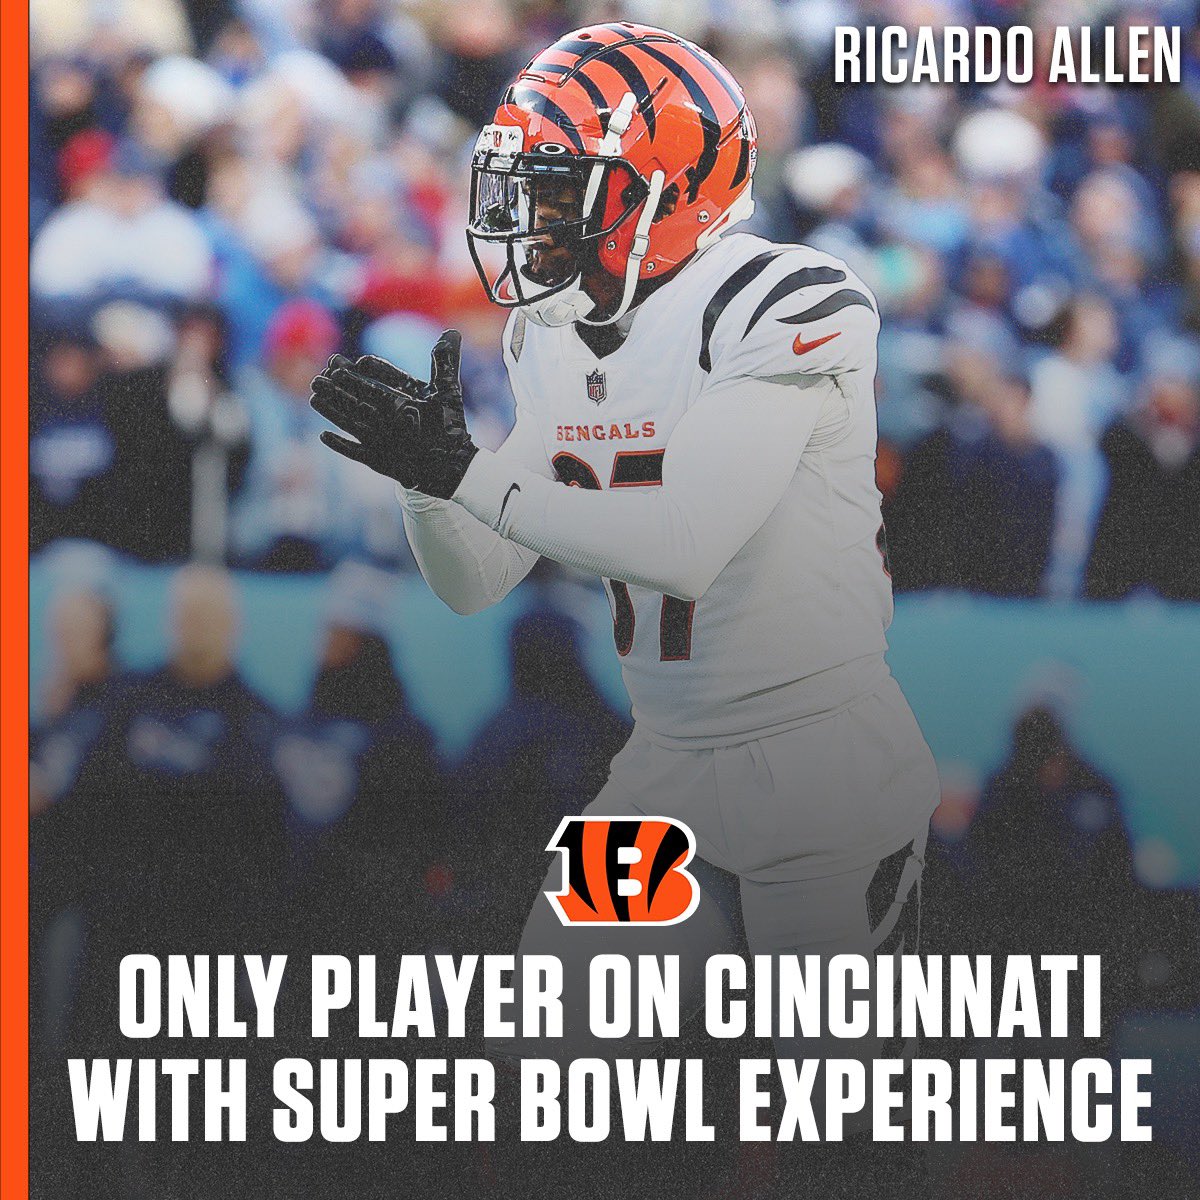 Sunday Night Football on NBC on X: 'The @Bengals only have ONE